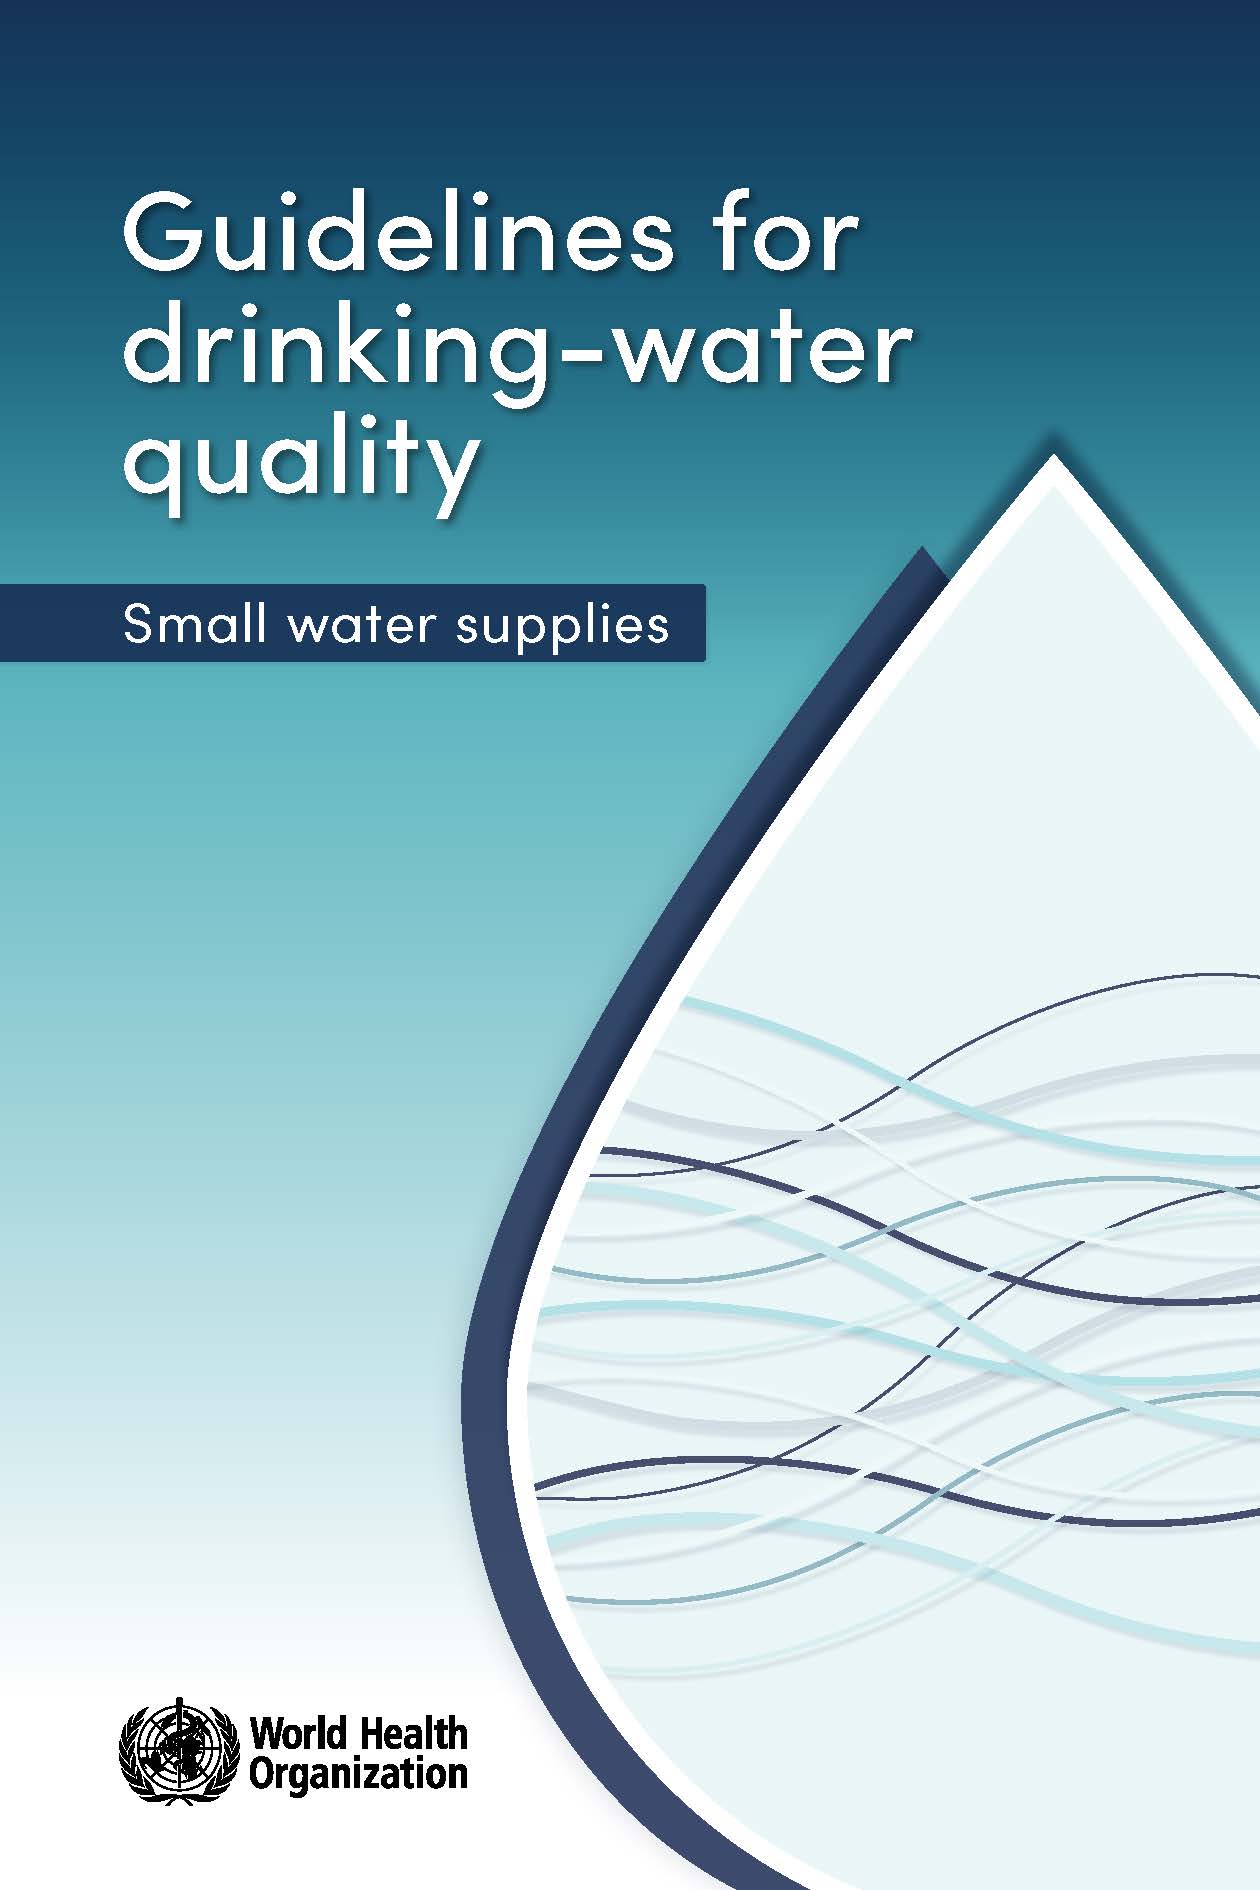 Cover Page of the Guidelines for Drinking-Water Quality: Small Water Supplies